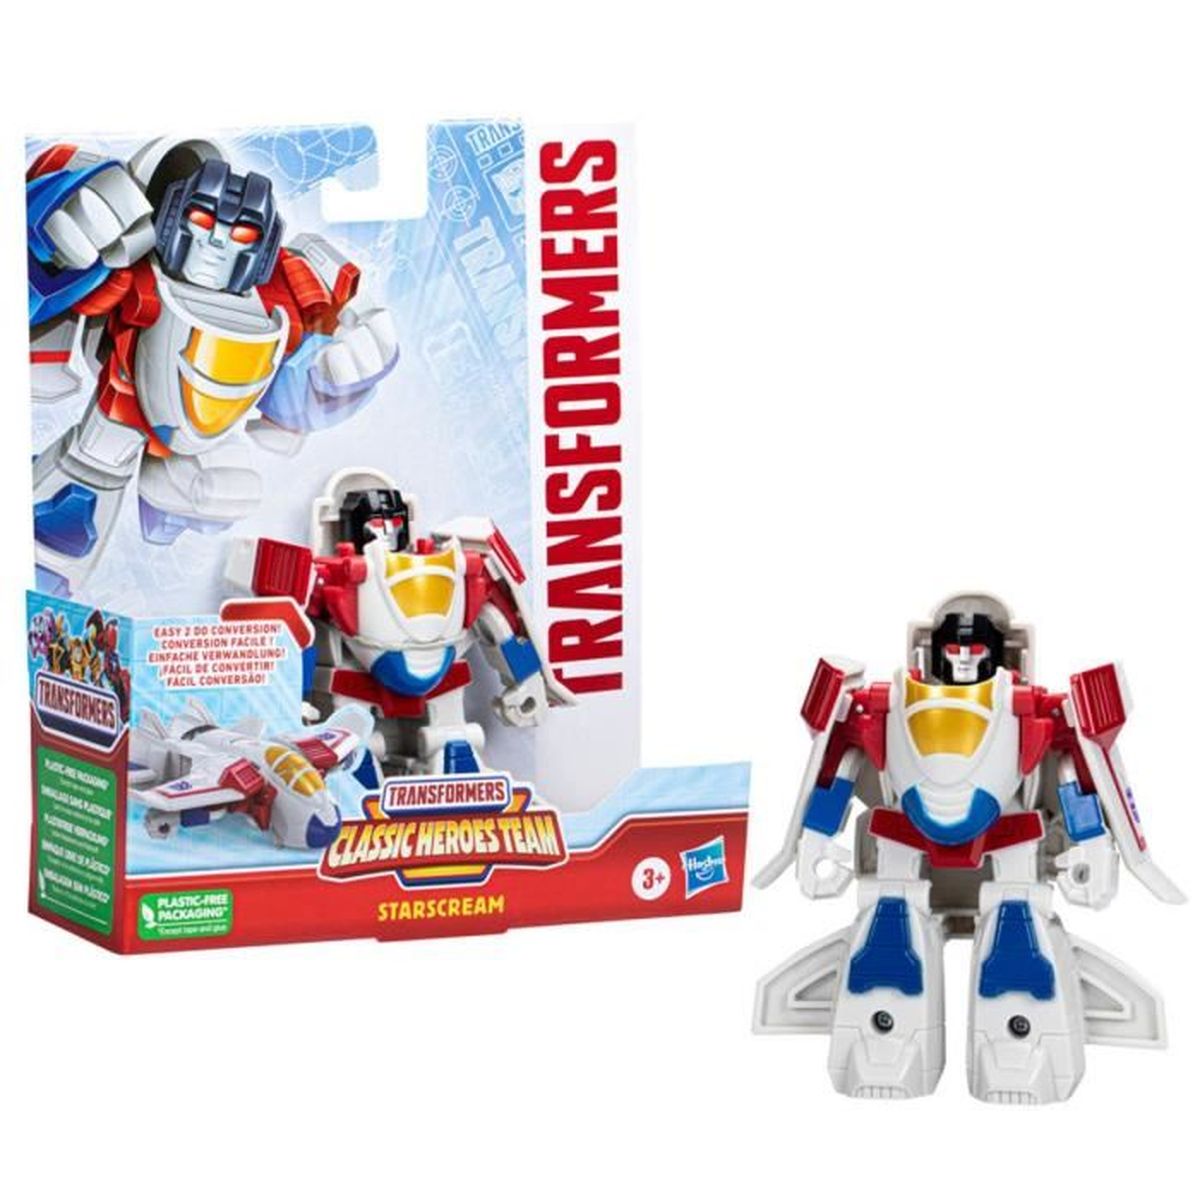 Transformers News: Re: Transformers: Rescue Bots Toy Products and Merchandise